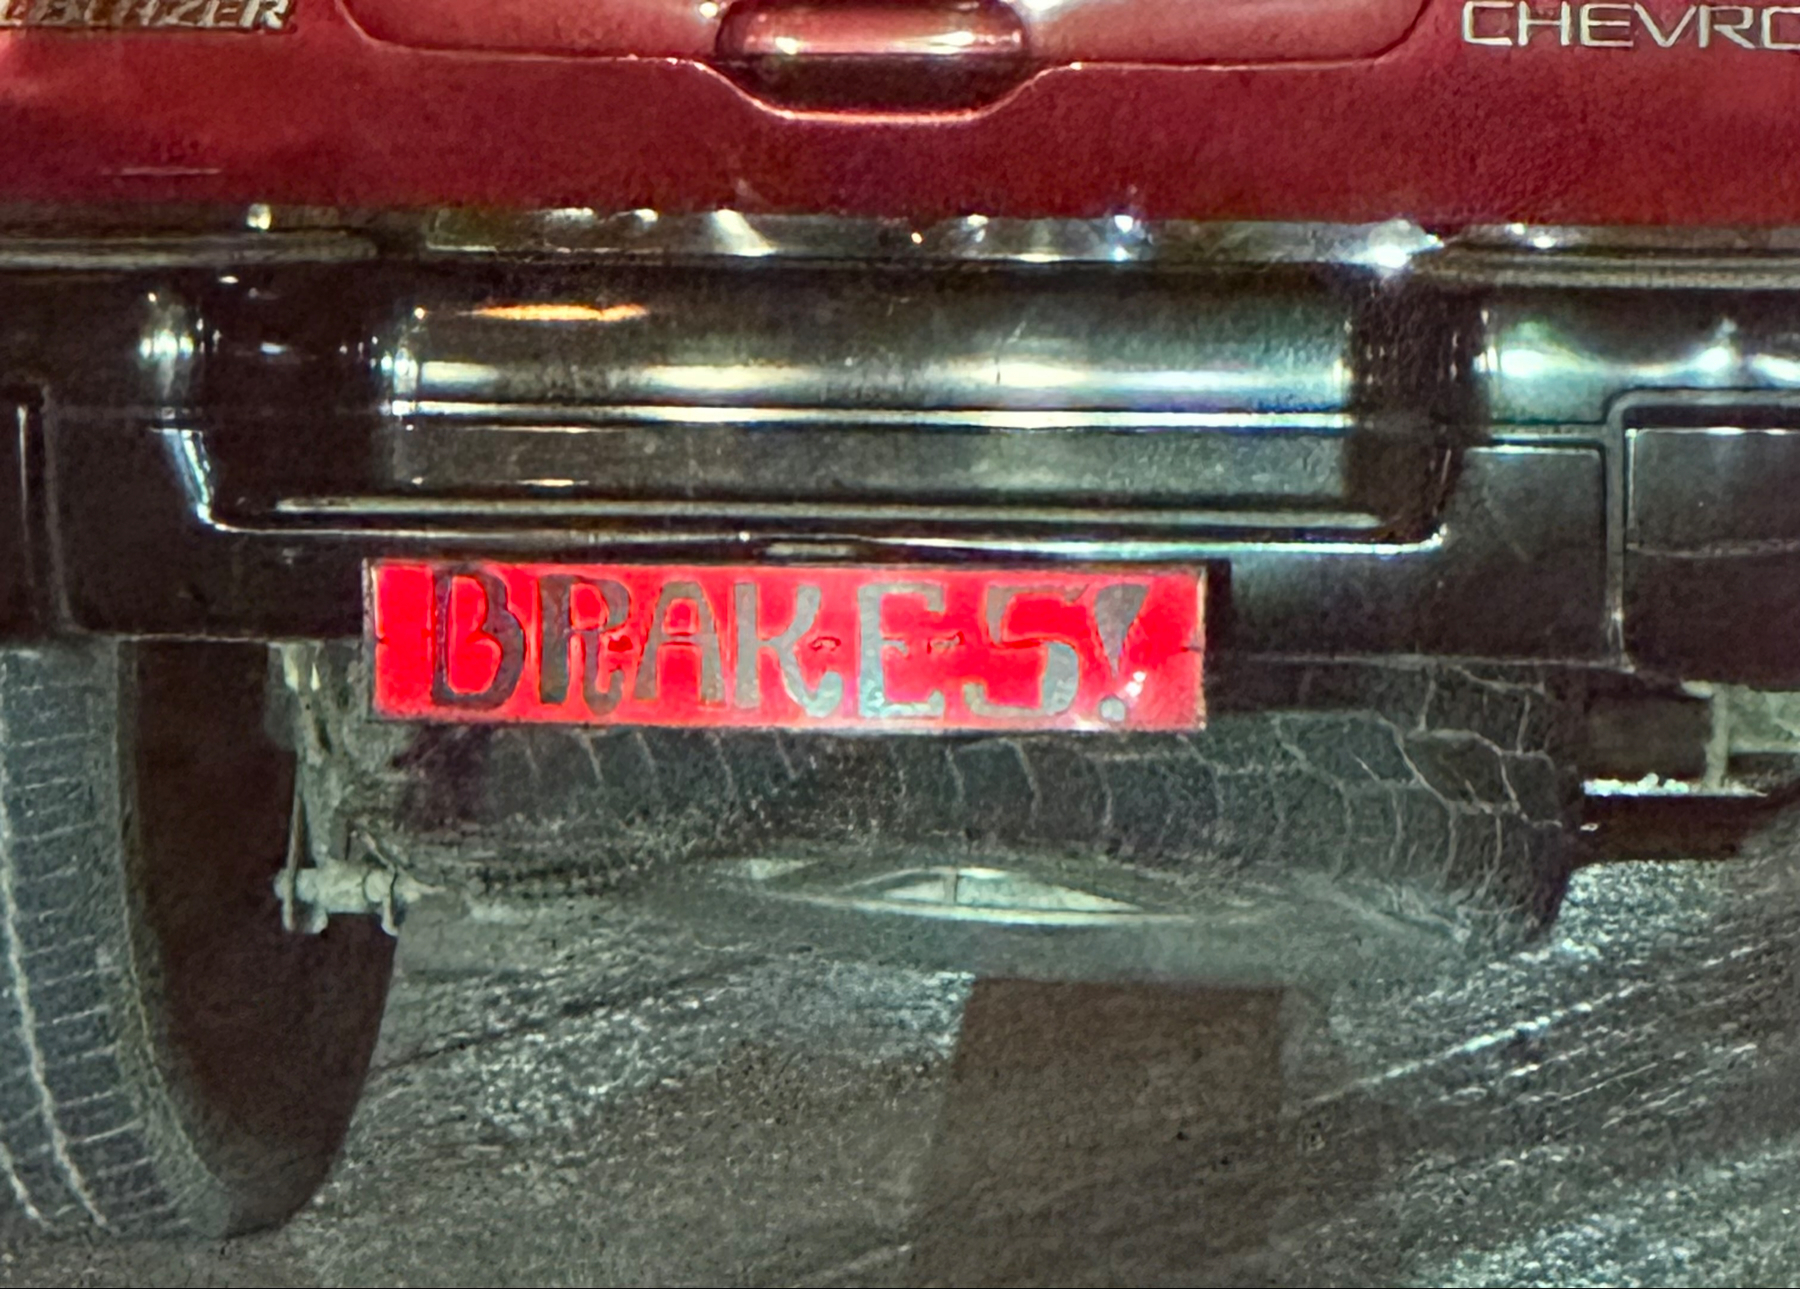 Rear view of a red Chevrolet Blazer with a custom license plate that reads “BRAKES!” displayed in red lettering on a reflective background.